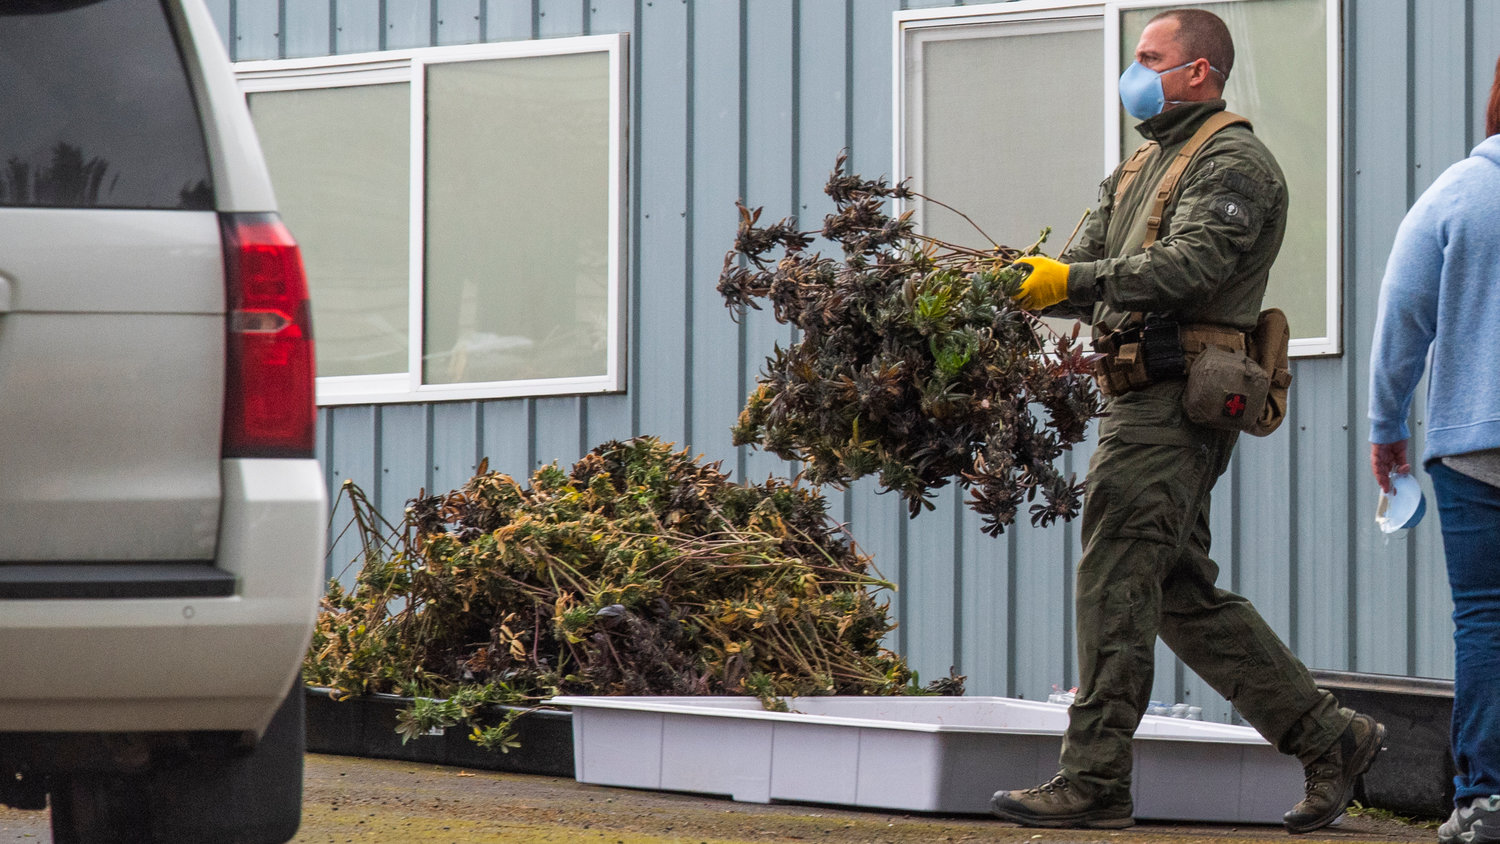 Police officers remove plants from a structure in the 100 block of Carroll Way off Frogner Road Thursday afternoon in Chehalis following the arrest of one individual while serving a search warrant that also located firearms.